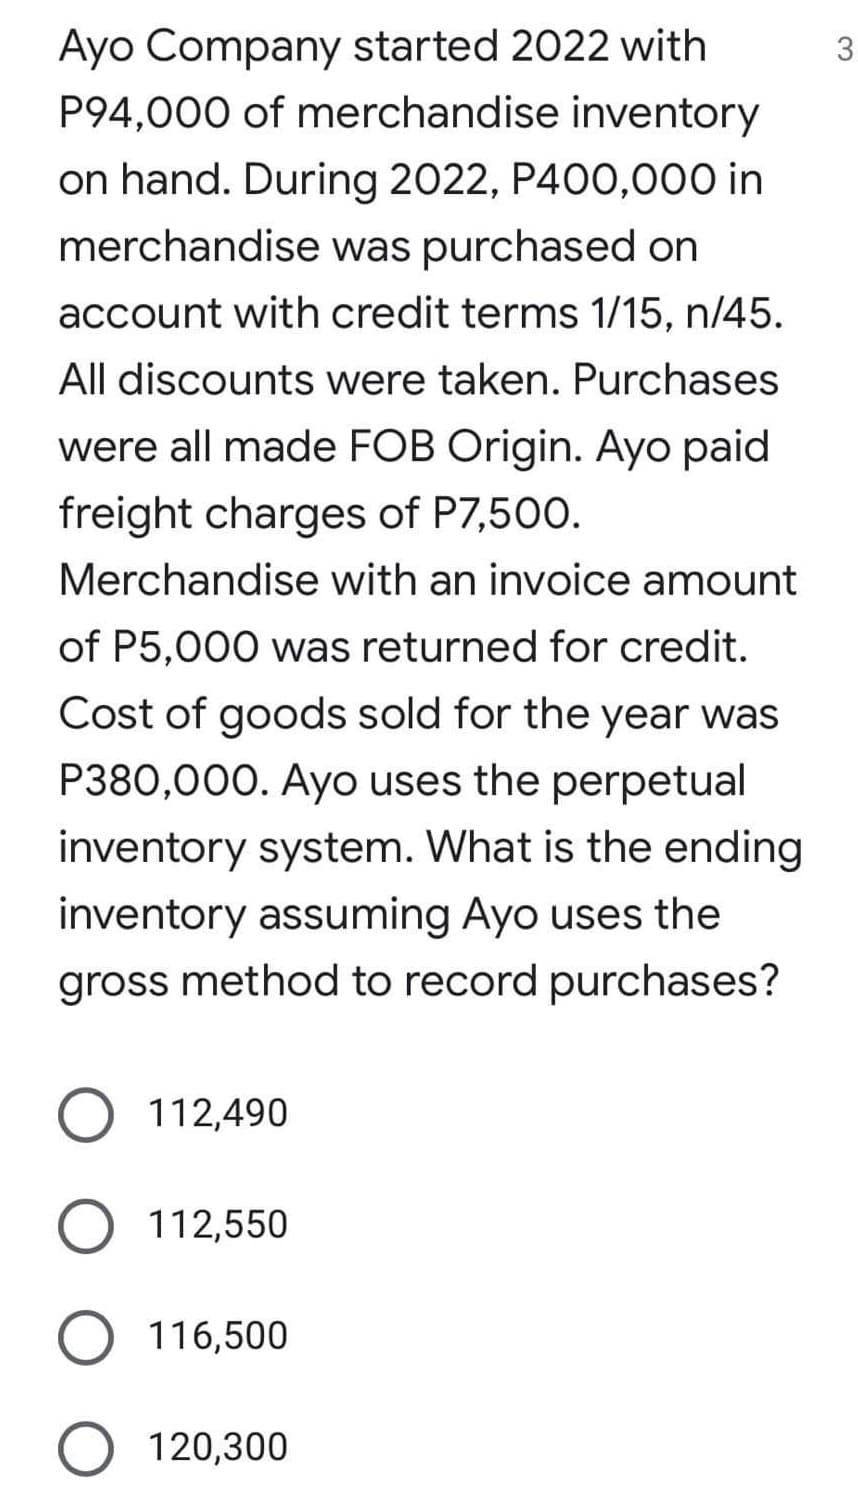 Ayo Company started 2022 with
3
P94,000 of merchandise inventory
on hand. During 2022, P400,000 in
merchandise was purchased on
account with credit terms 1/15, n/45.
All discounts were taken. Purchases
were all made FOB Origin. Ayo paid
freight charges of P7,500.
Merchandise with an invoice amount
of P5,000 was returned for credit.
Cost of goods sold for the year was
P380,000. Ayo uses the perpetual
inventory system. What is the ending
inventory assuming Ayo uses the
gross method to record purchases?
O 112,490
O 112,550
O 116,500
O 120,300
